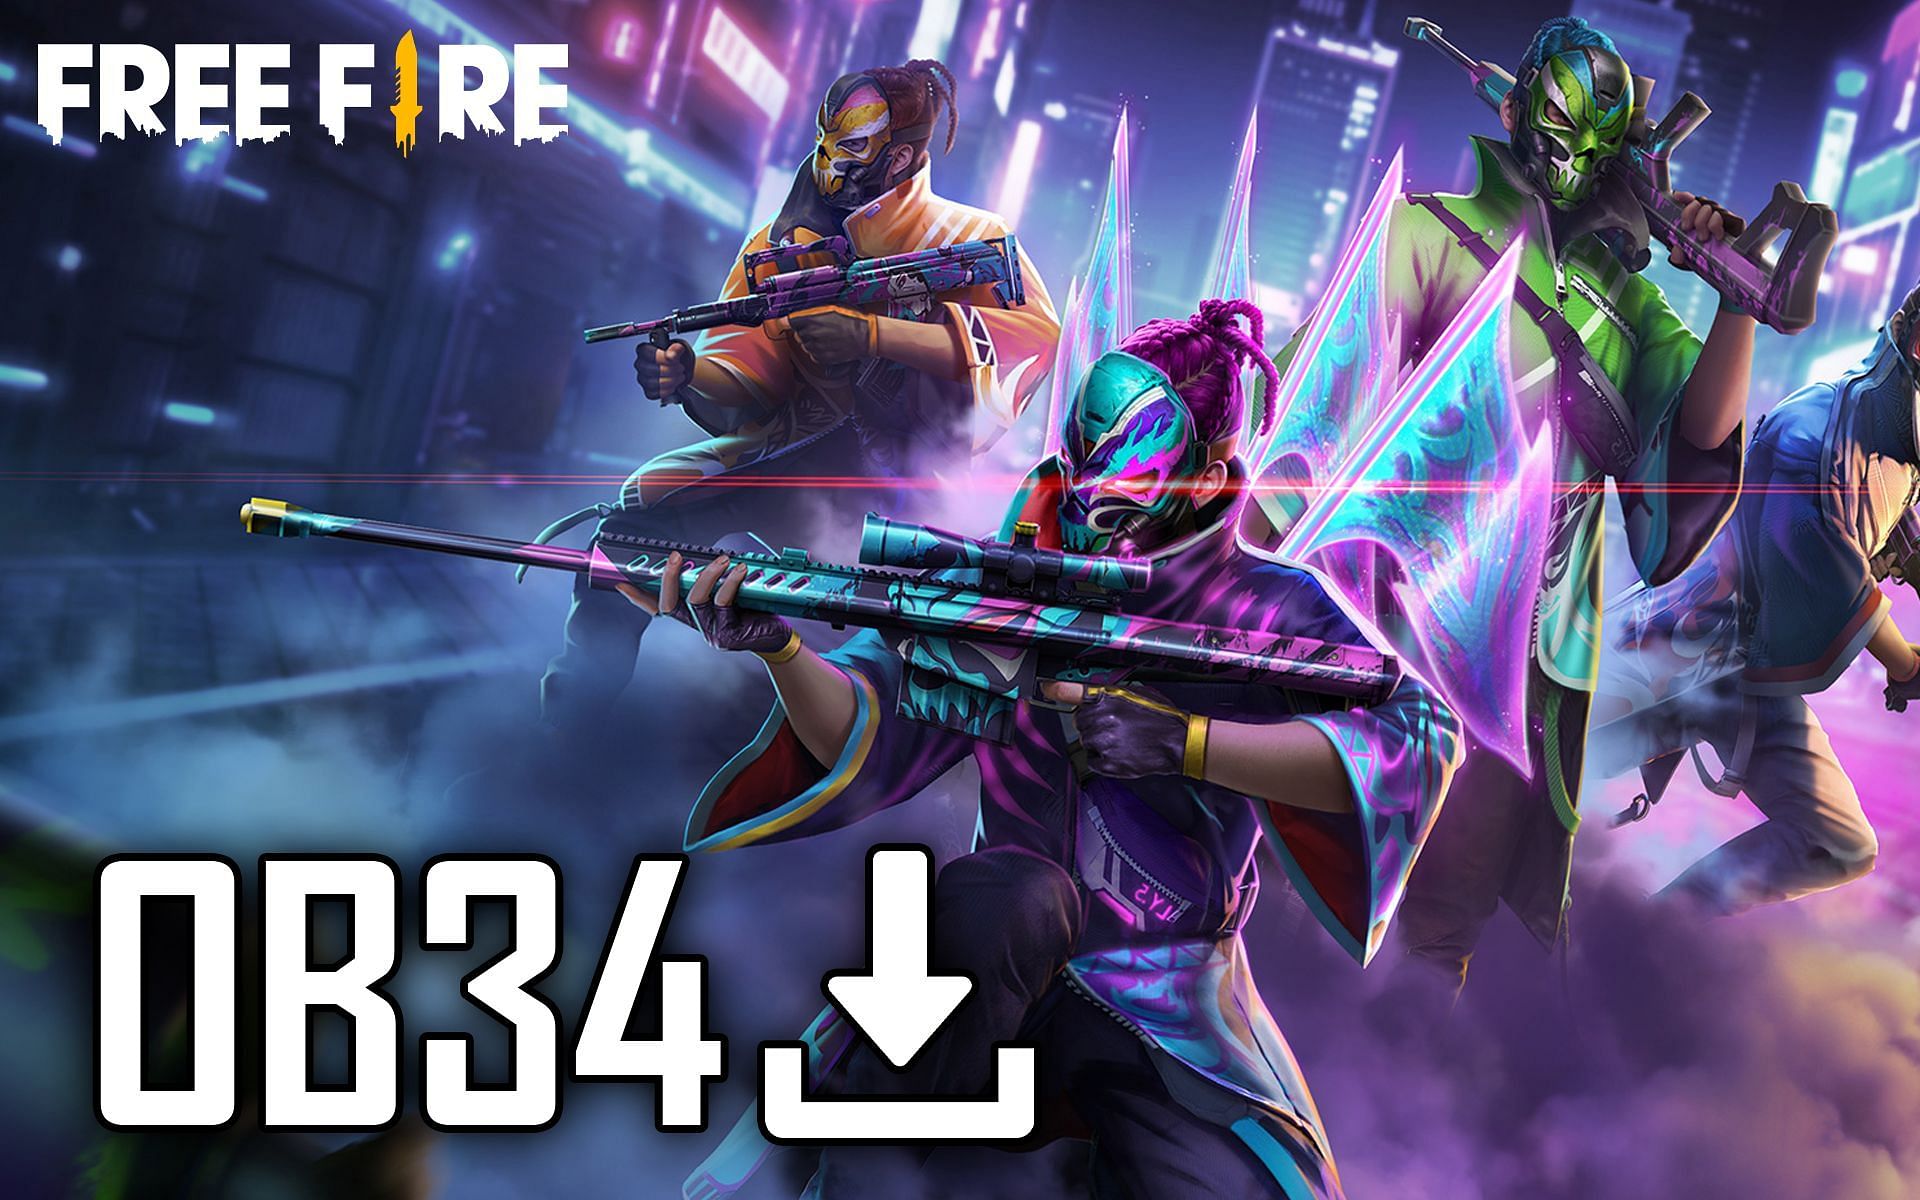 Mobile gamers can download the Free Fire OB34 APK today (Image via Sportskeeda)